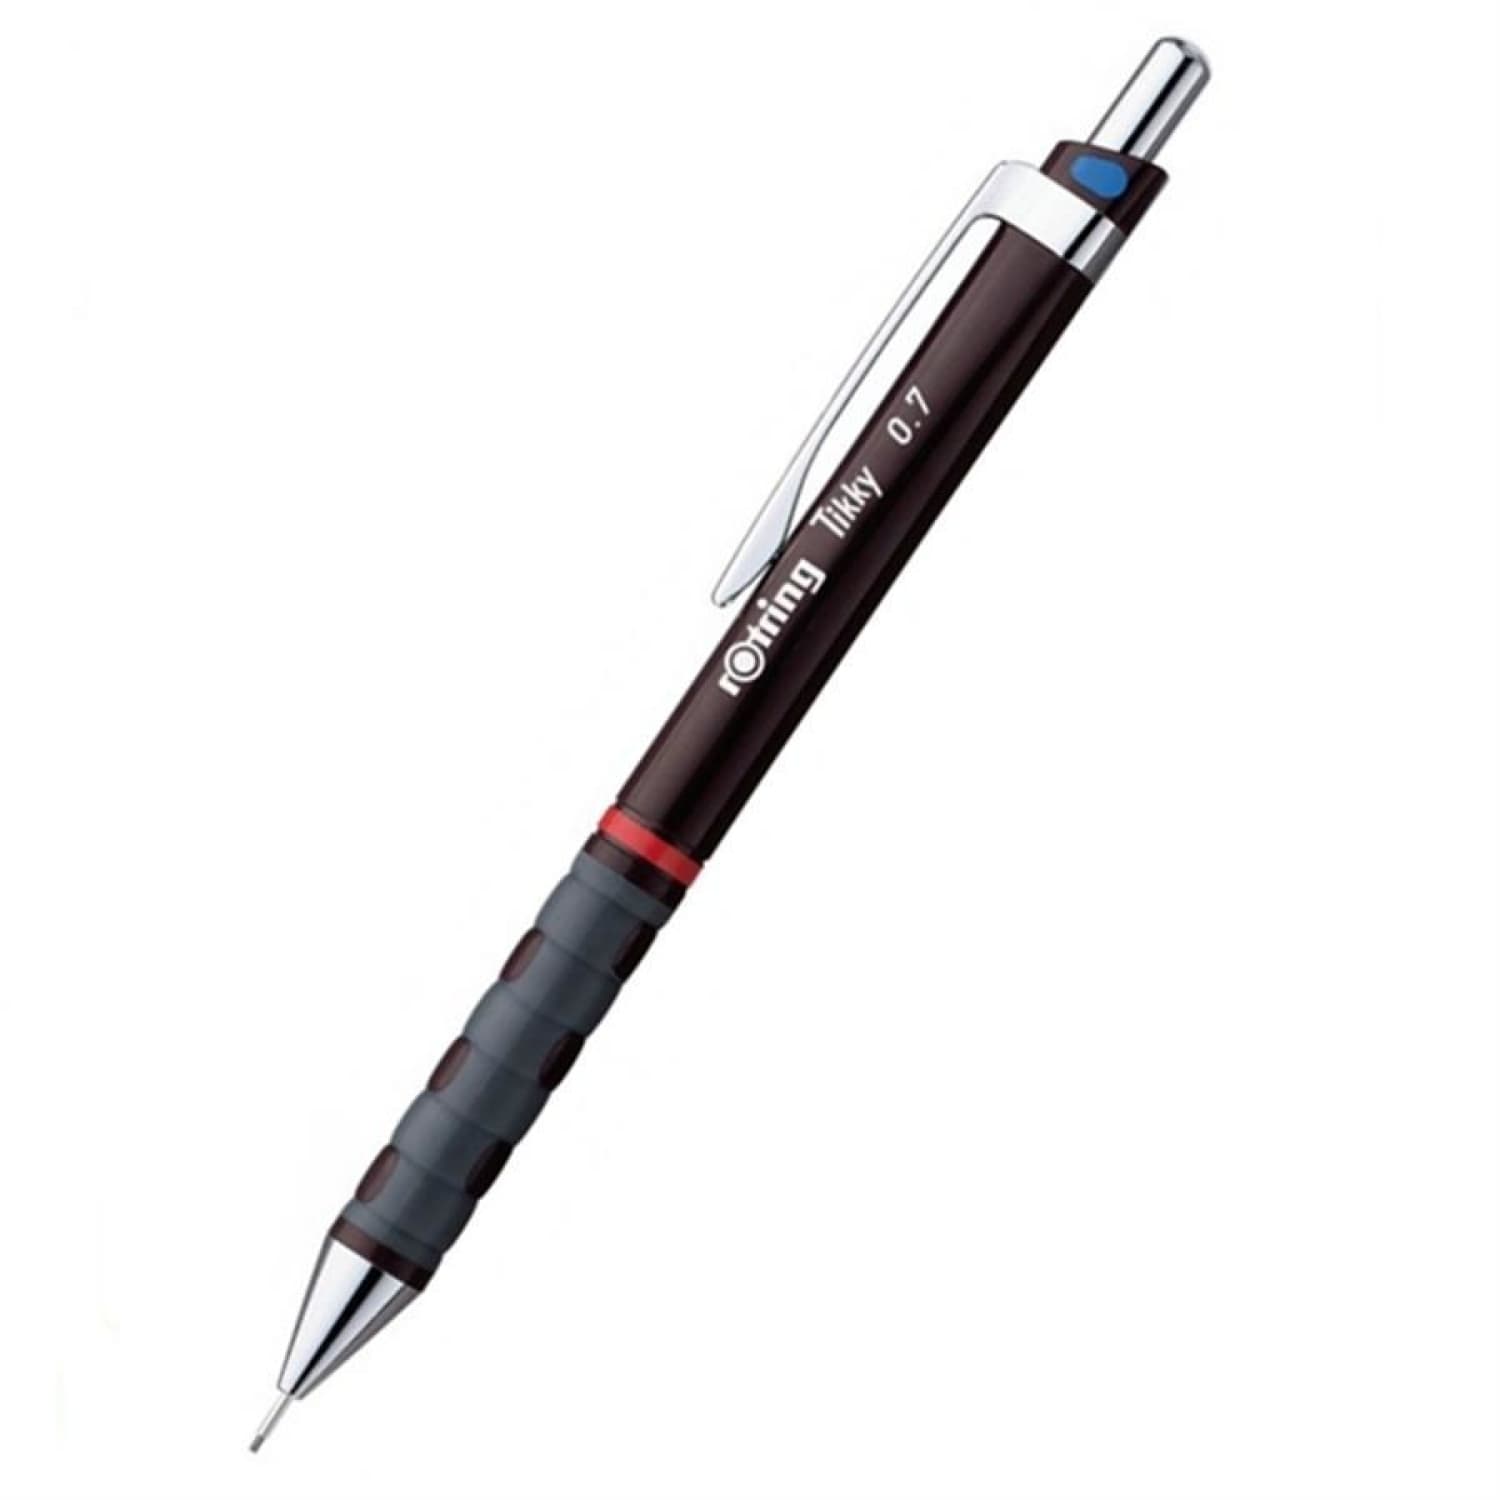 rOtring Tikky 0.5mm Refill (Mechanical Pencil) 